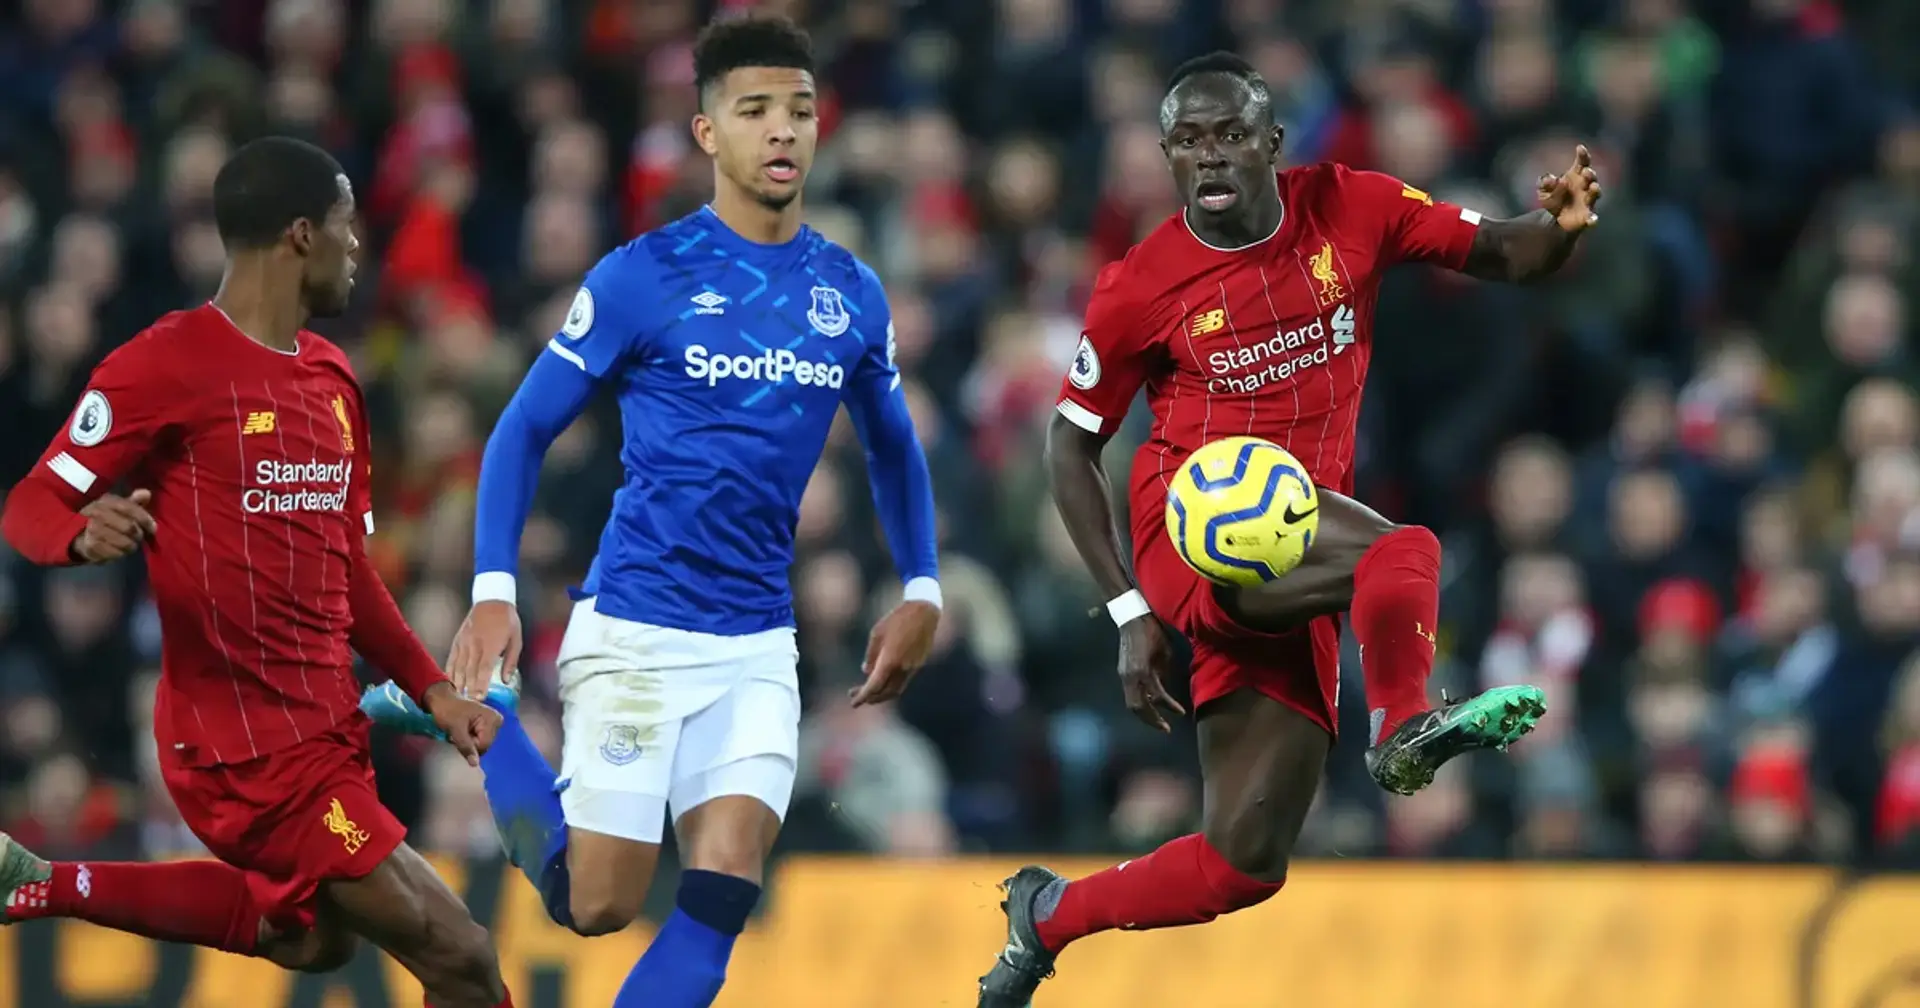 Everton vs Liverpool: team news, probable line-ups, score predictions and more - preview